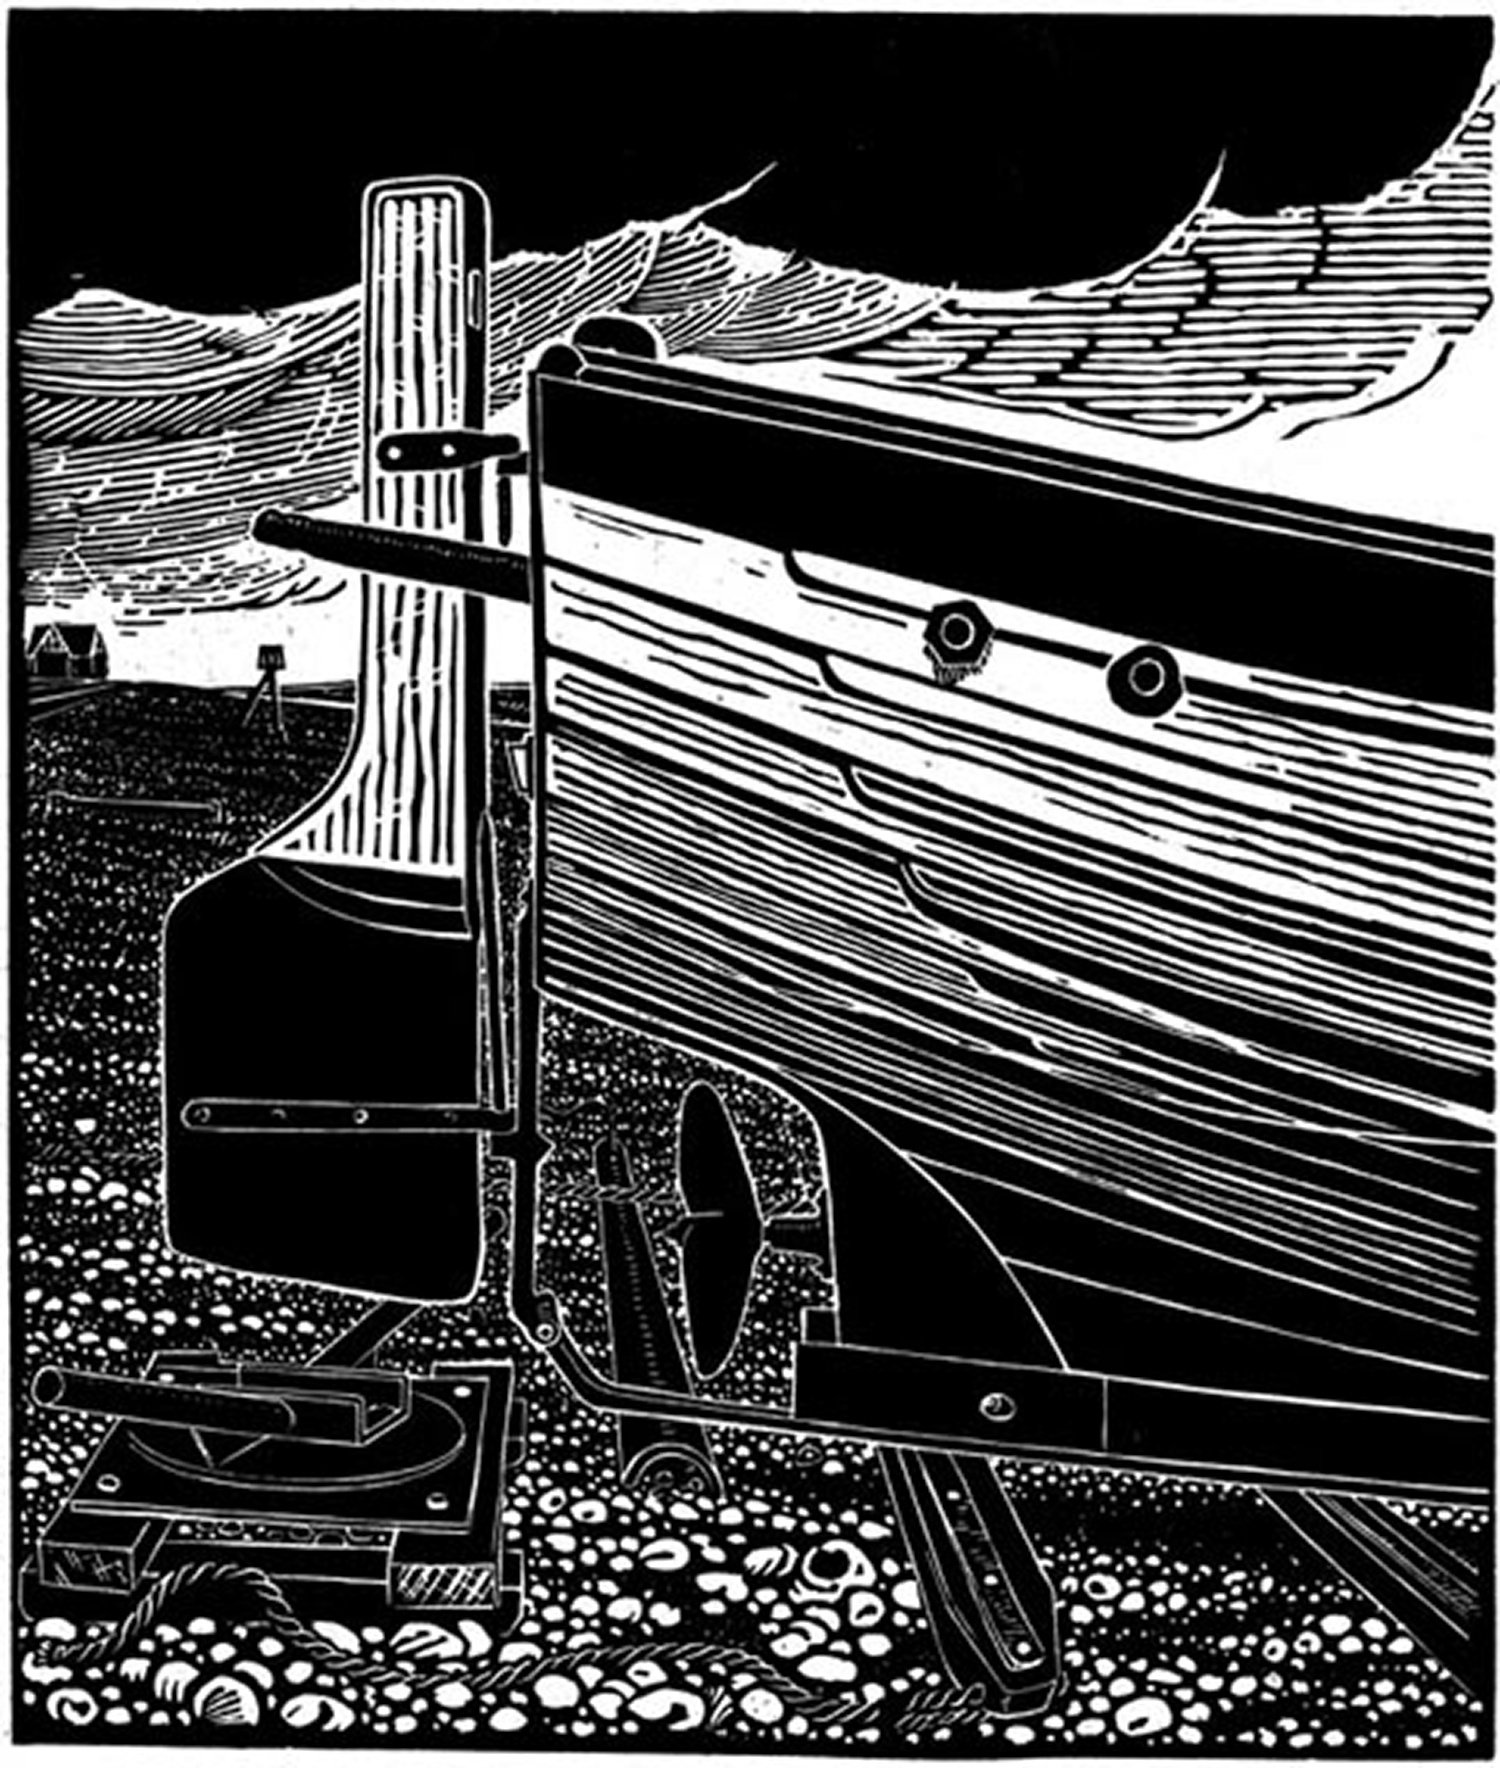 Stern of an Aldeburgh Beach  Boat by James Dodds